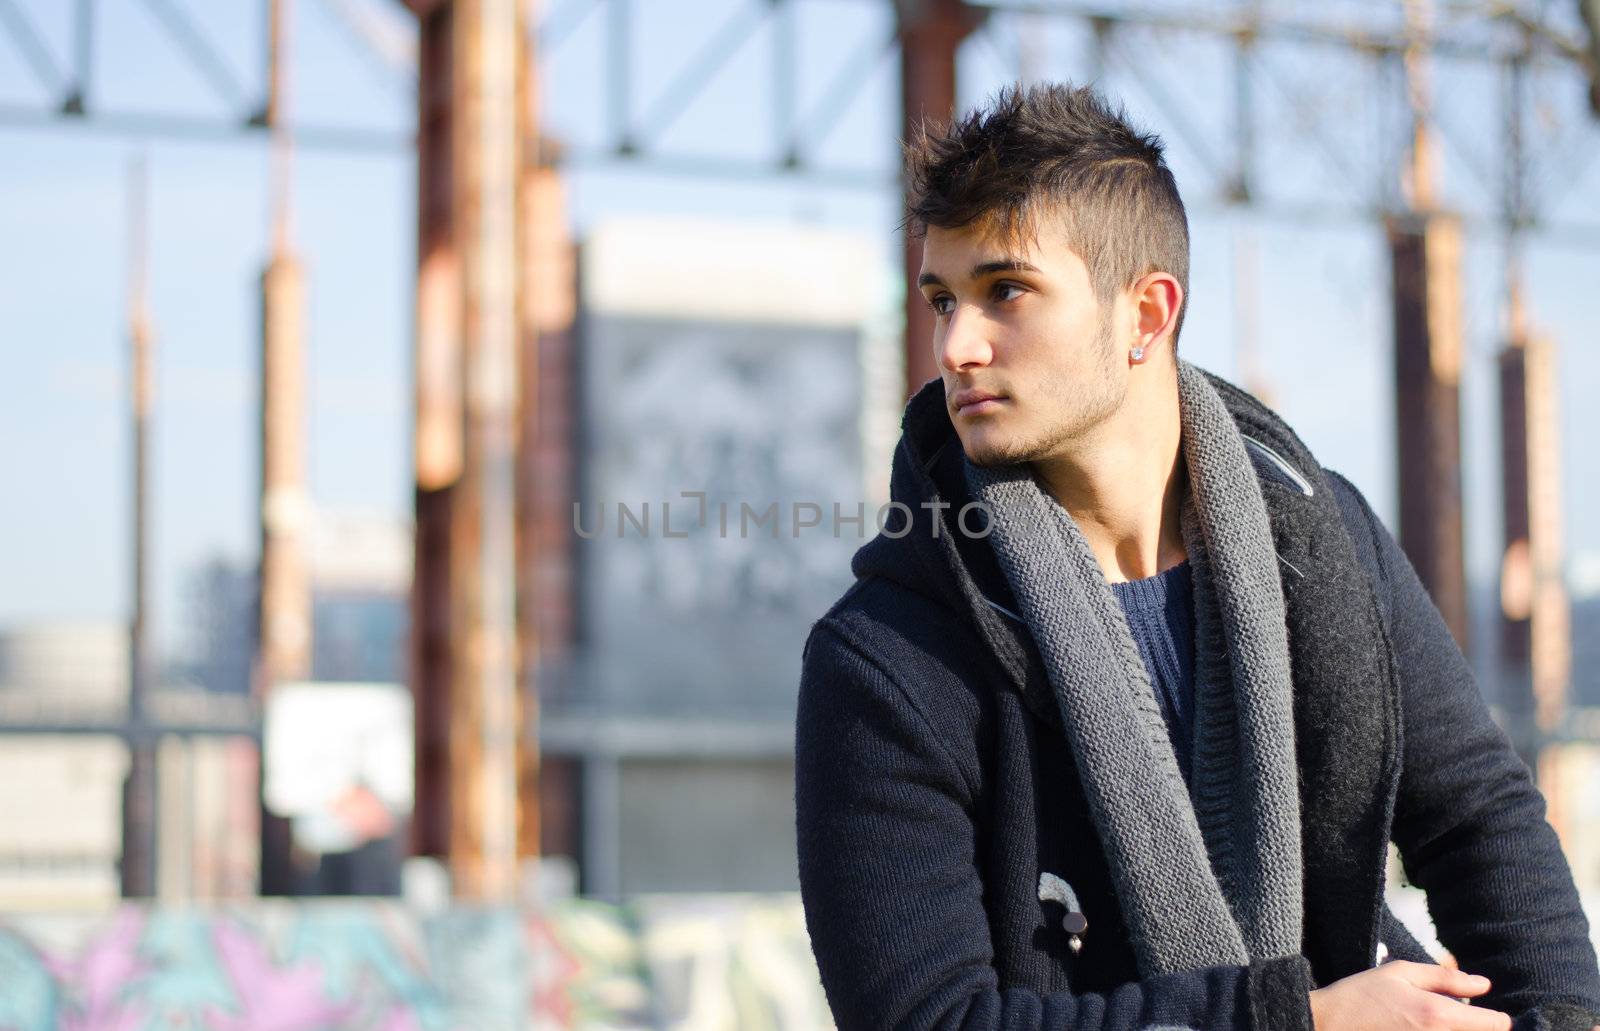 Handsome young man in urban or industrial setting, large copyspace